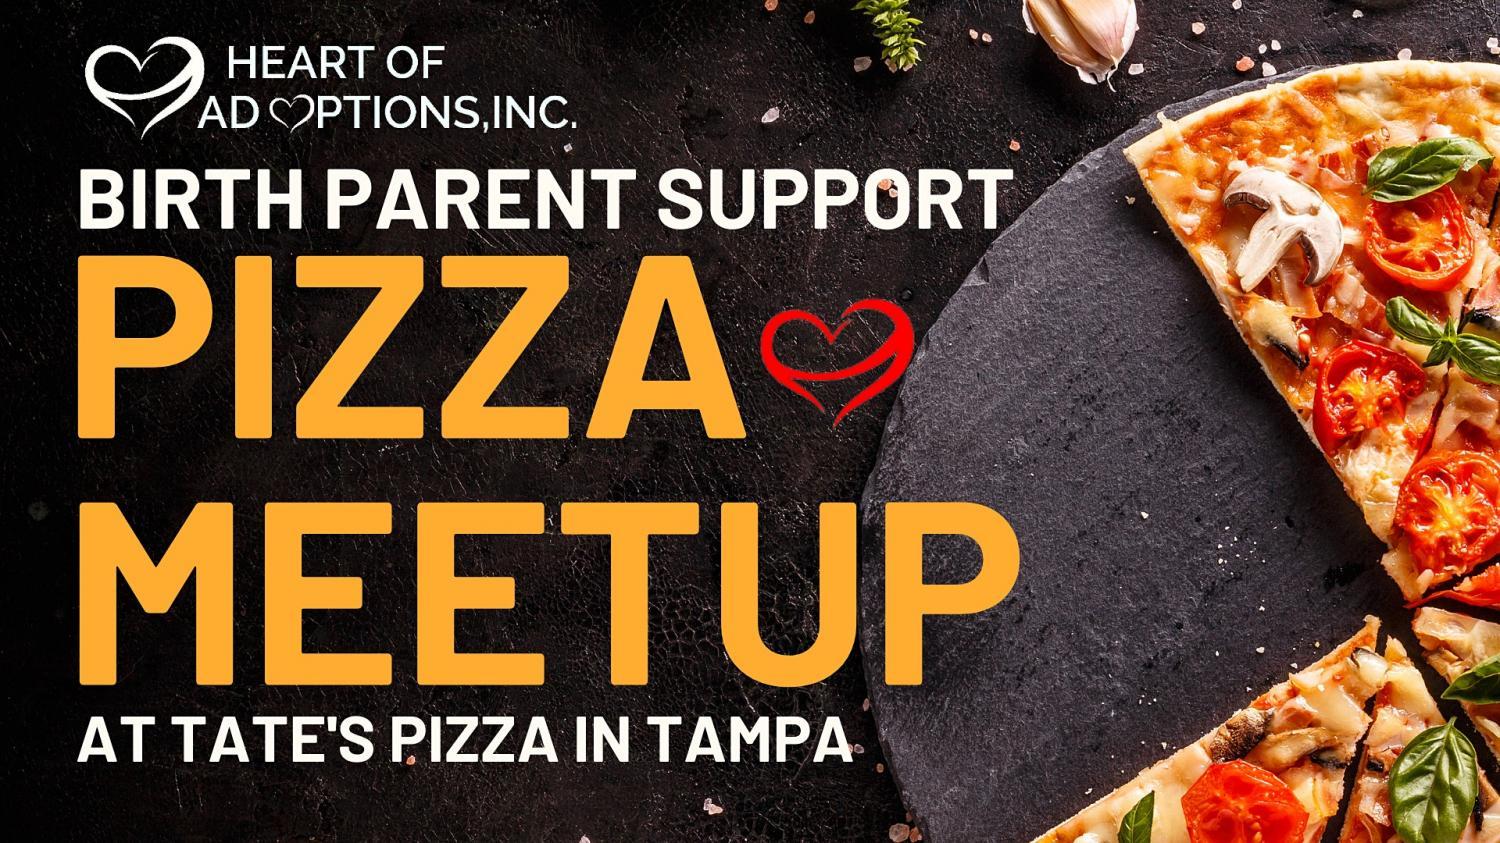 TAMPA HOPE Pizza & Support Meetup